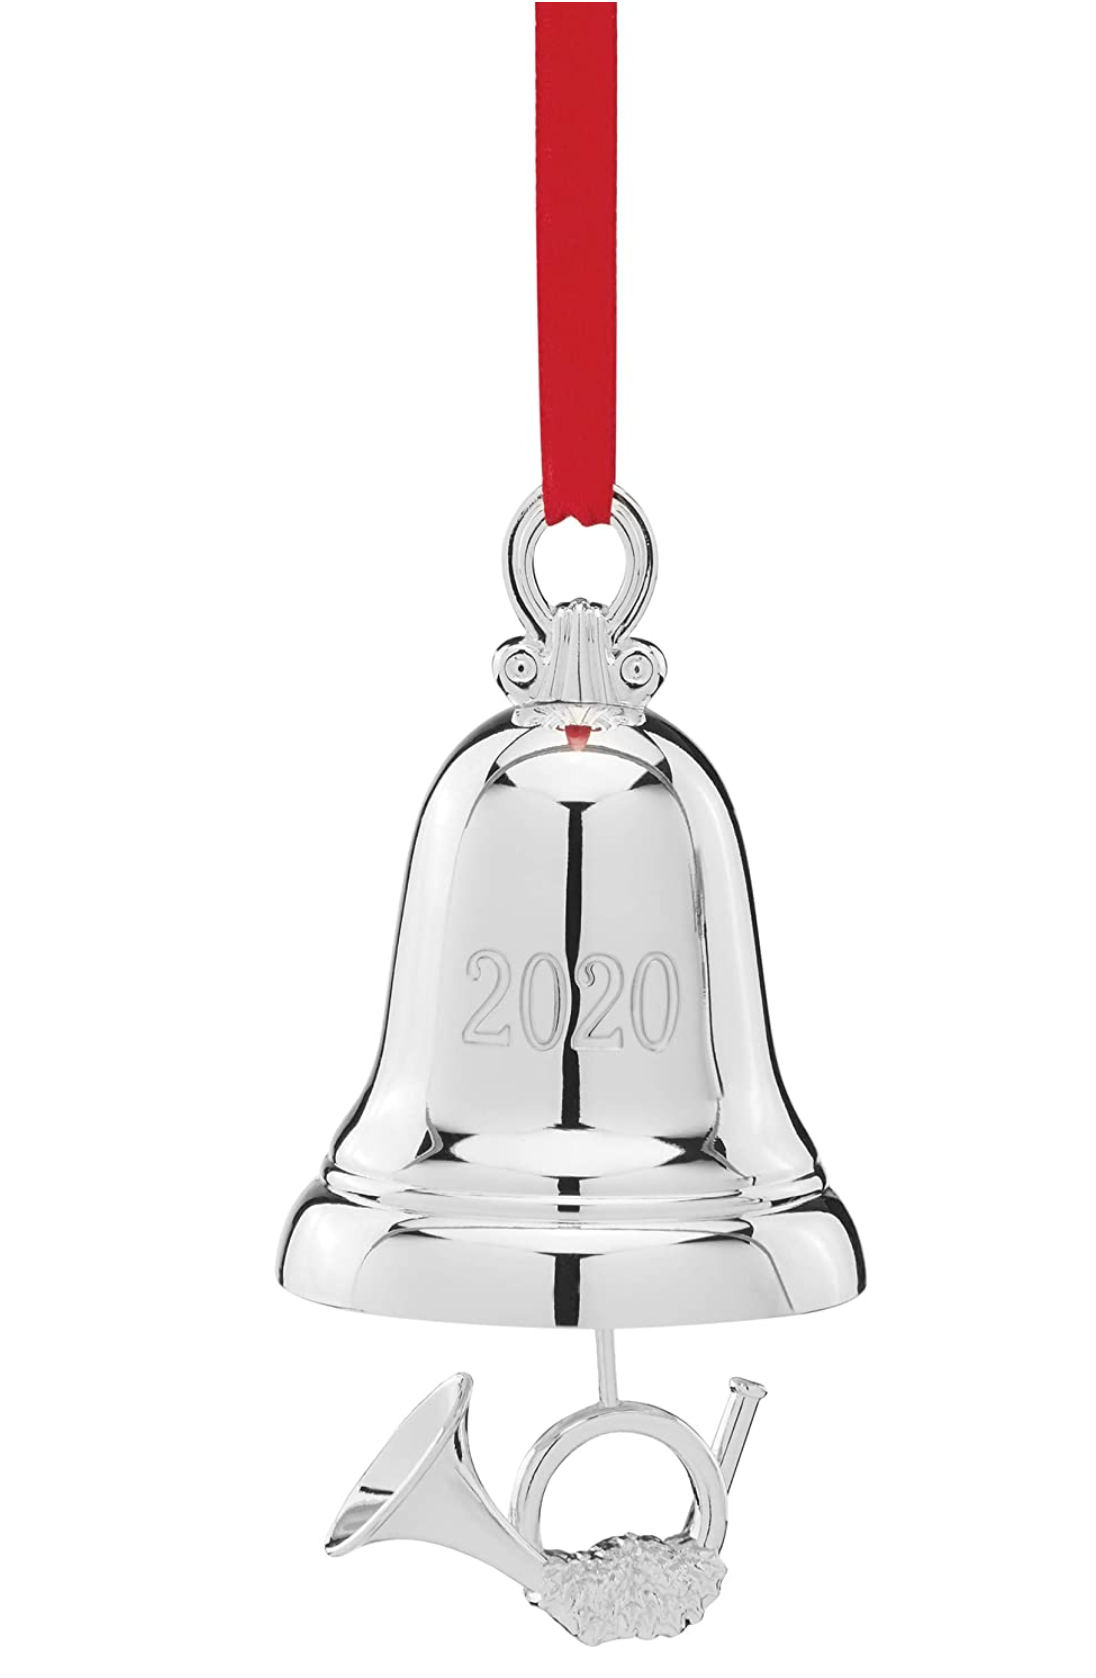 Disney Lenox 2020 Annual Silver Bell Christmas Ornament New with Box